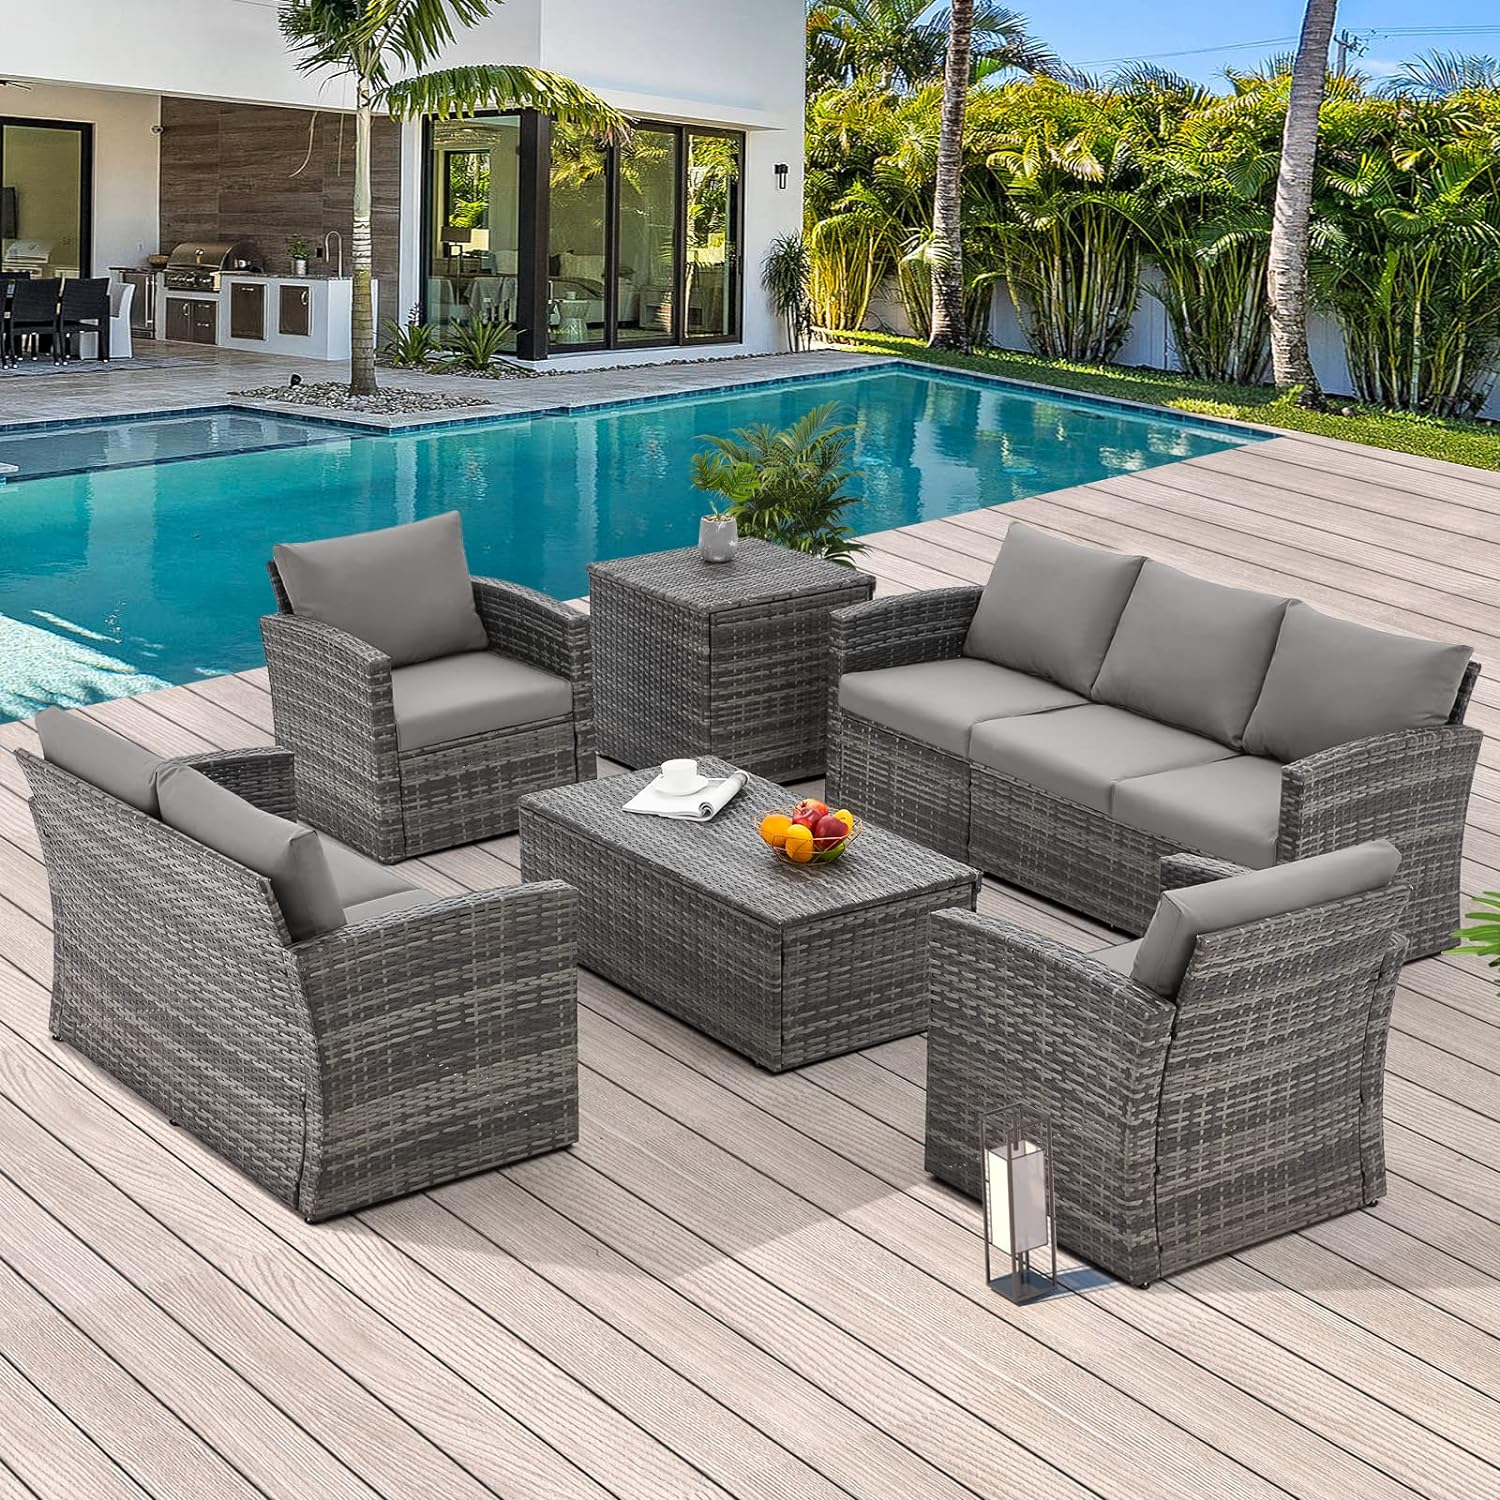 AECOJOY 7 Pieces Patio Furniture Set with Two Storage Boxes, Outdoor Rattan Conversation SetAll-Weather PE Wicker Sectional Sofa Outdoor Furniture for Garden, Backyard, Deck, Grey Rattan&Grey